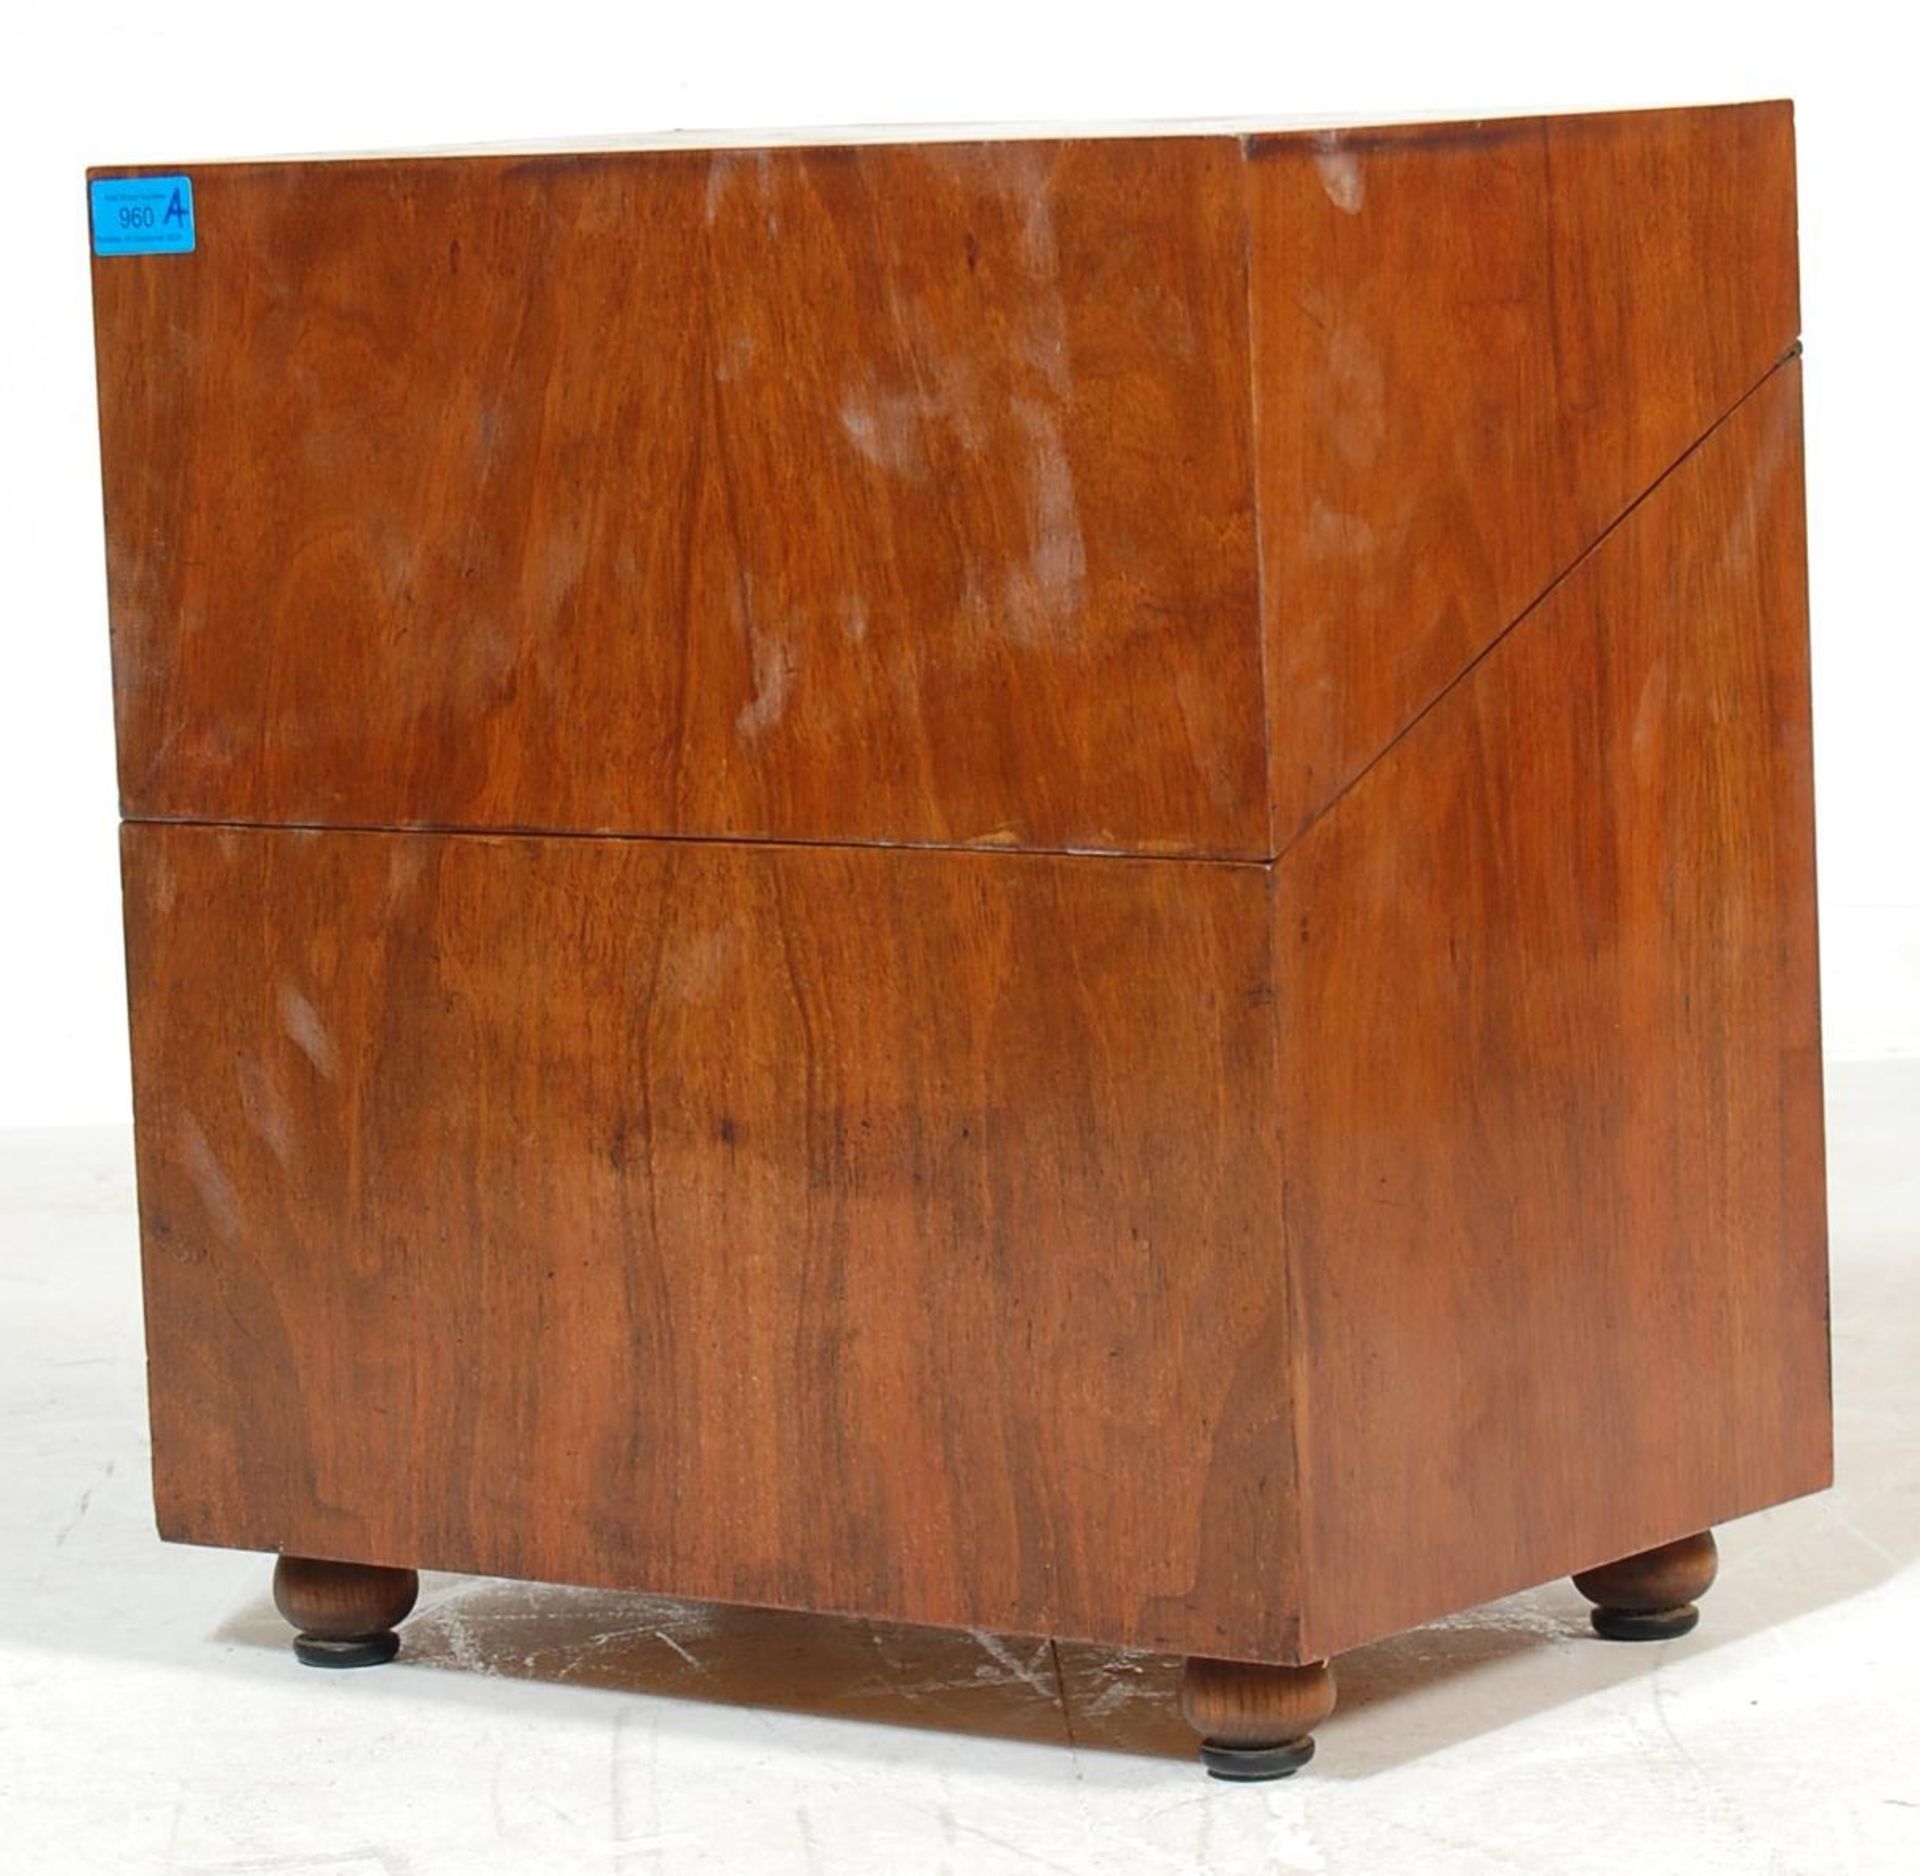 A MID CENTURY WALNUT RECORDS BOX WITH HINGED LID AND FITTED INTERIOR - Image 3 of 3